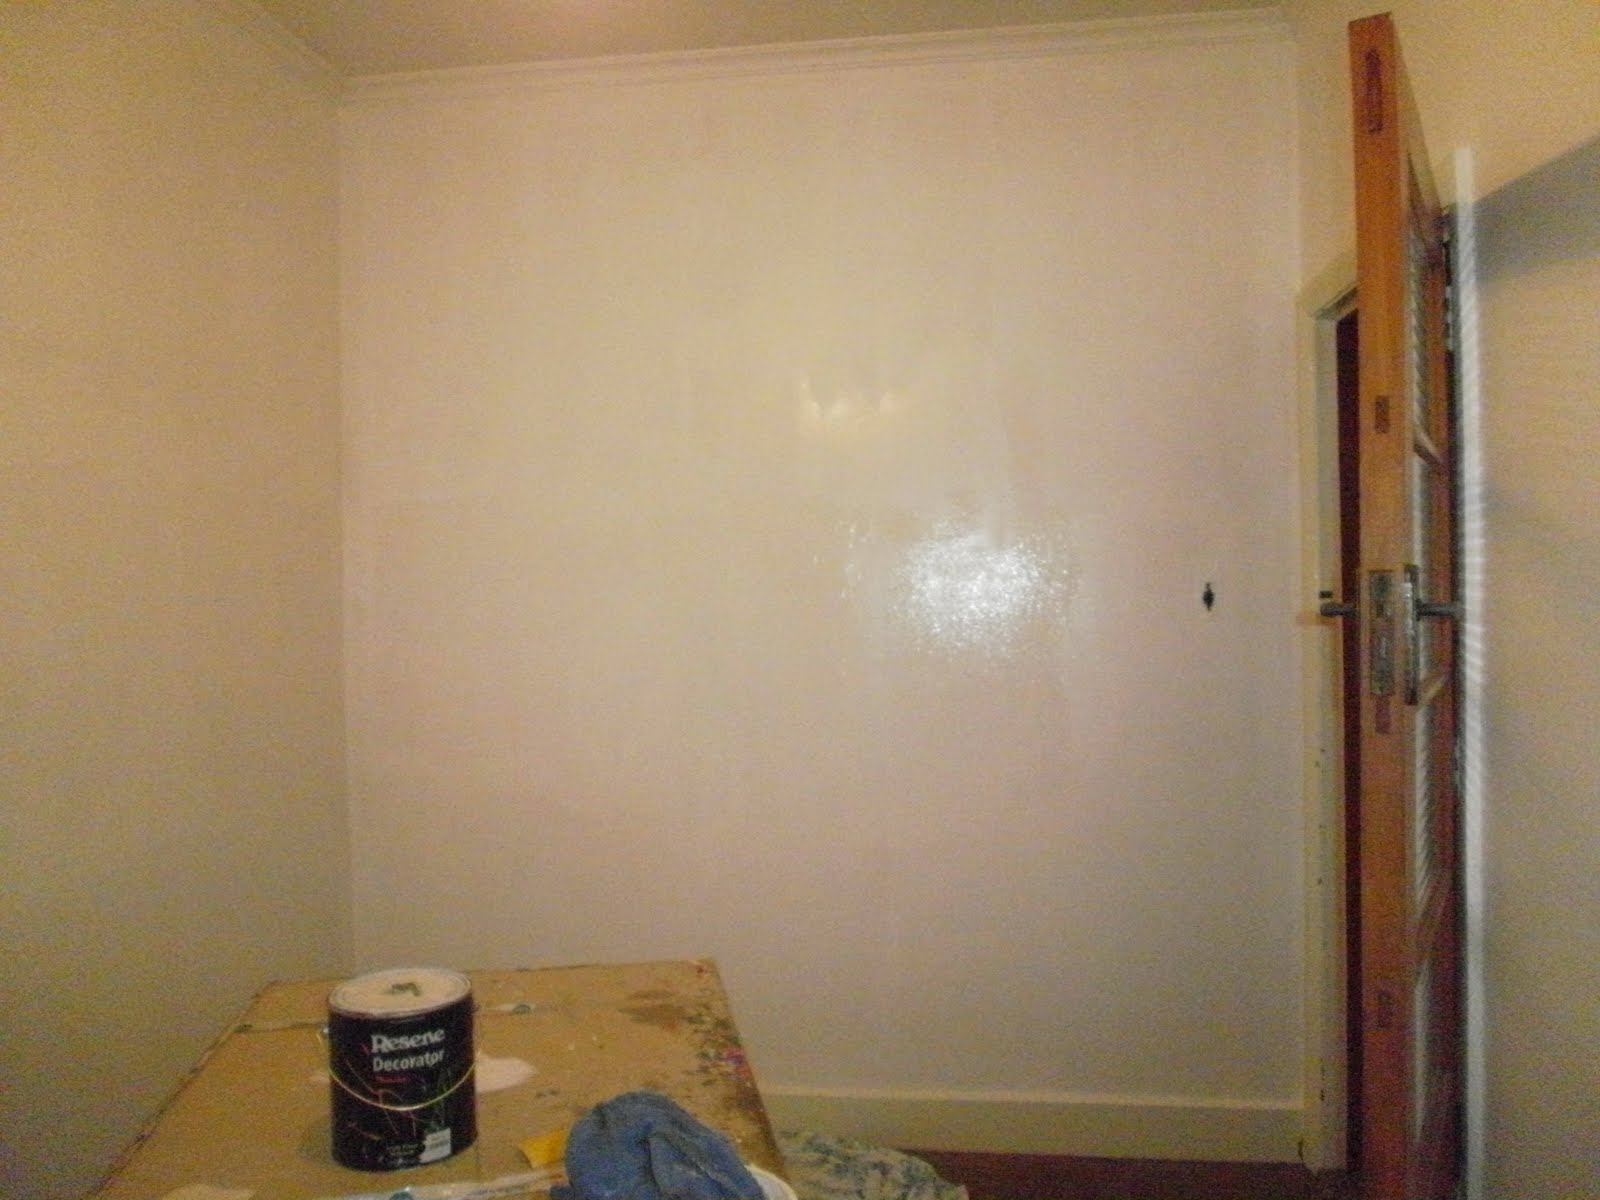 The primer undercoat is up. First coat of dizzy lizzie.